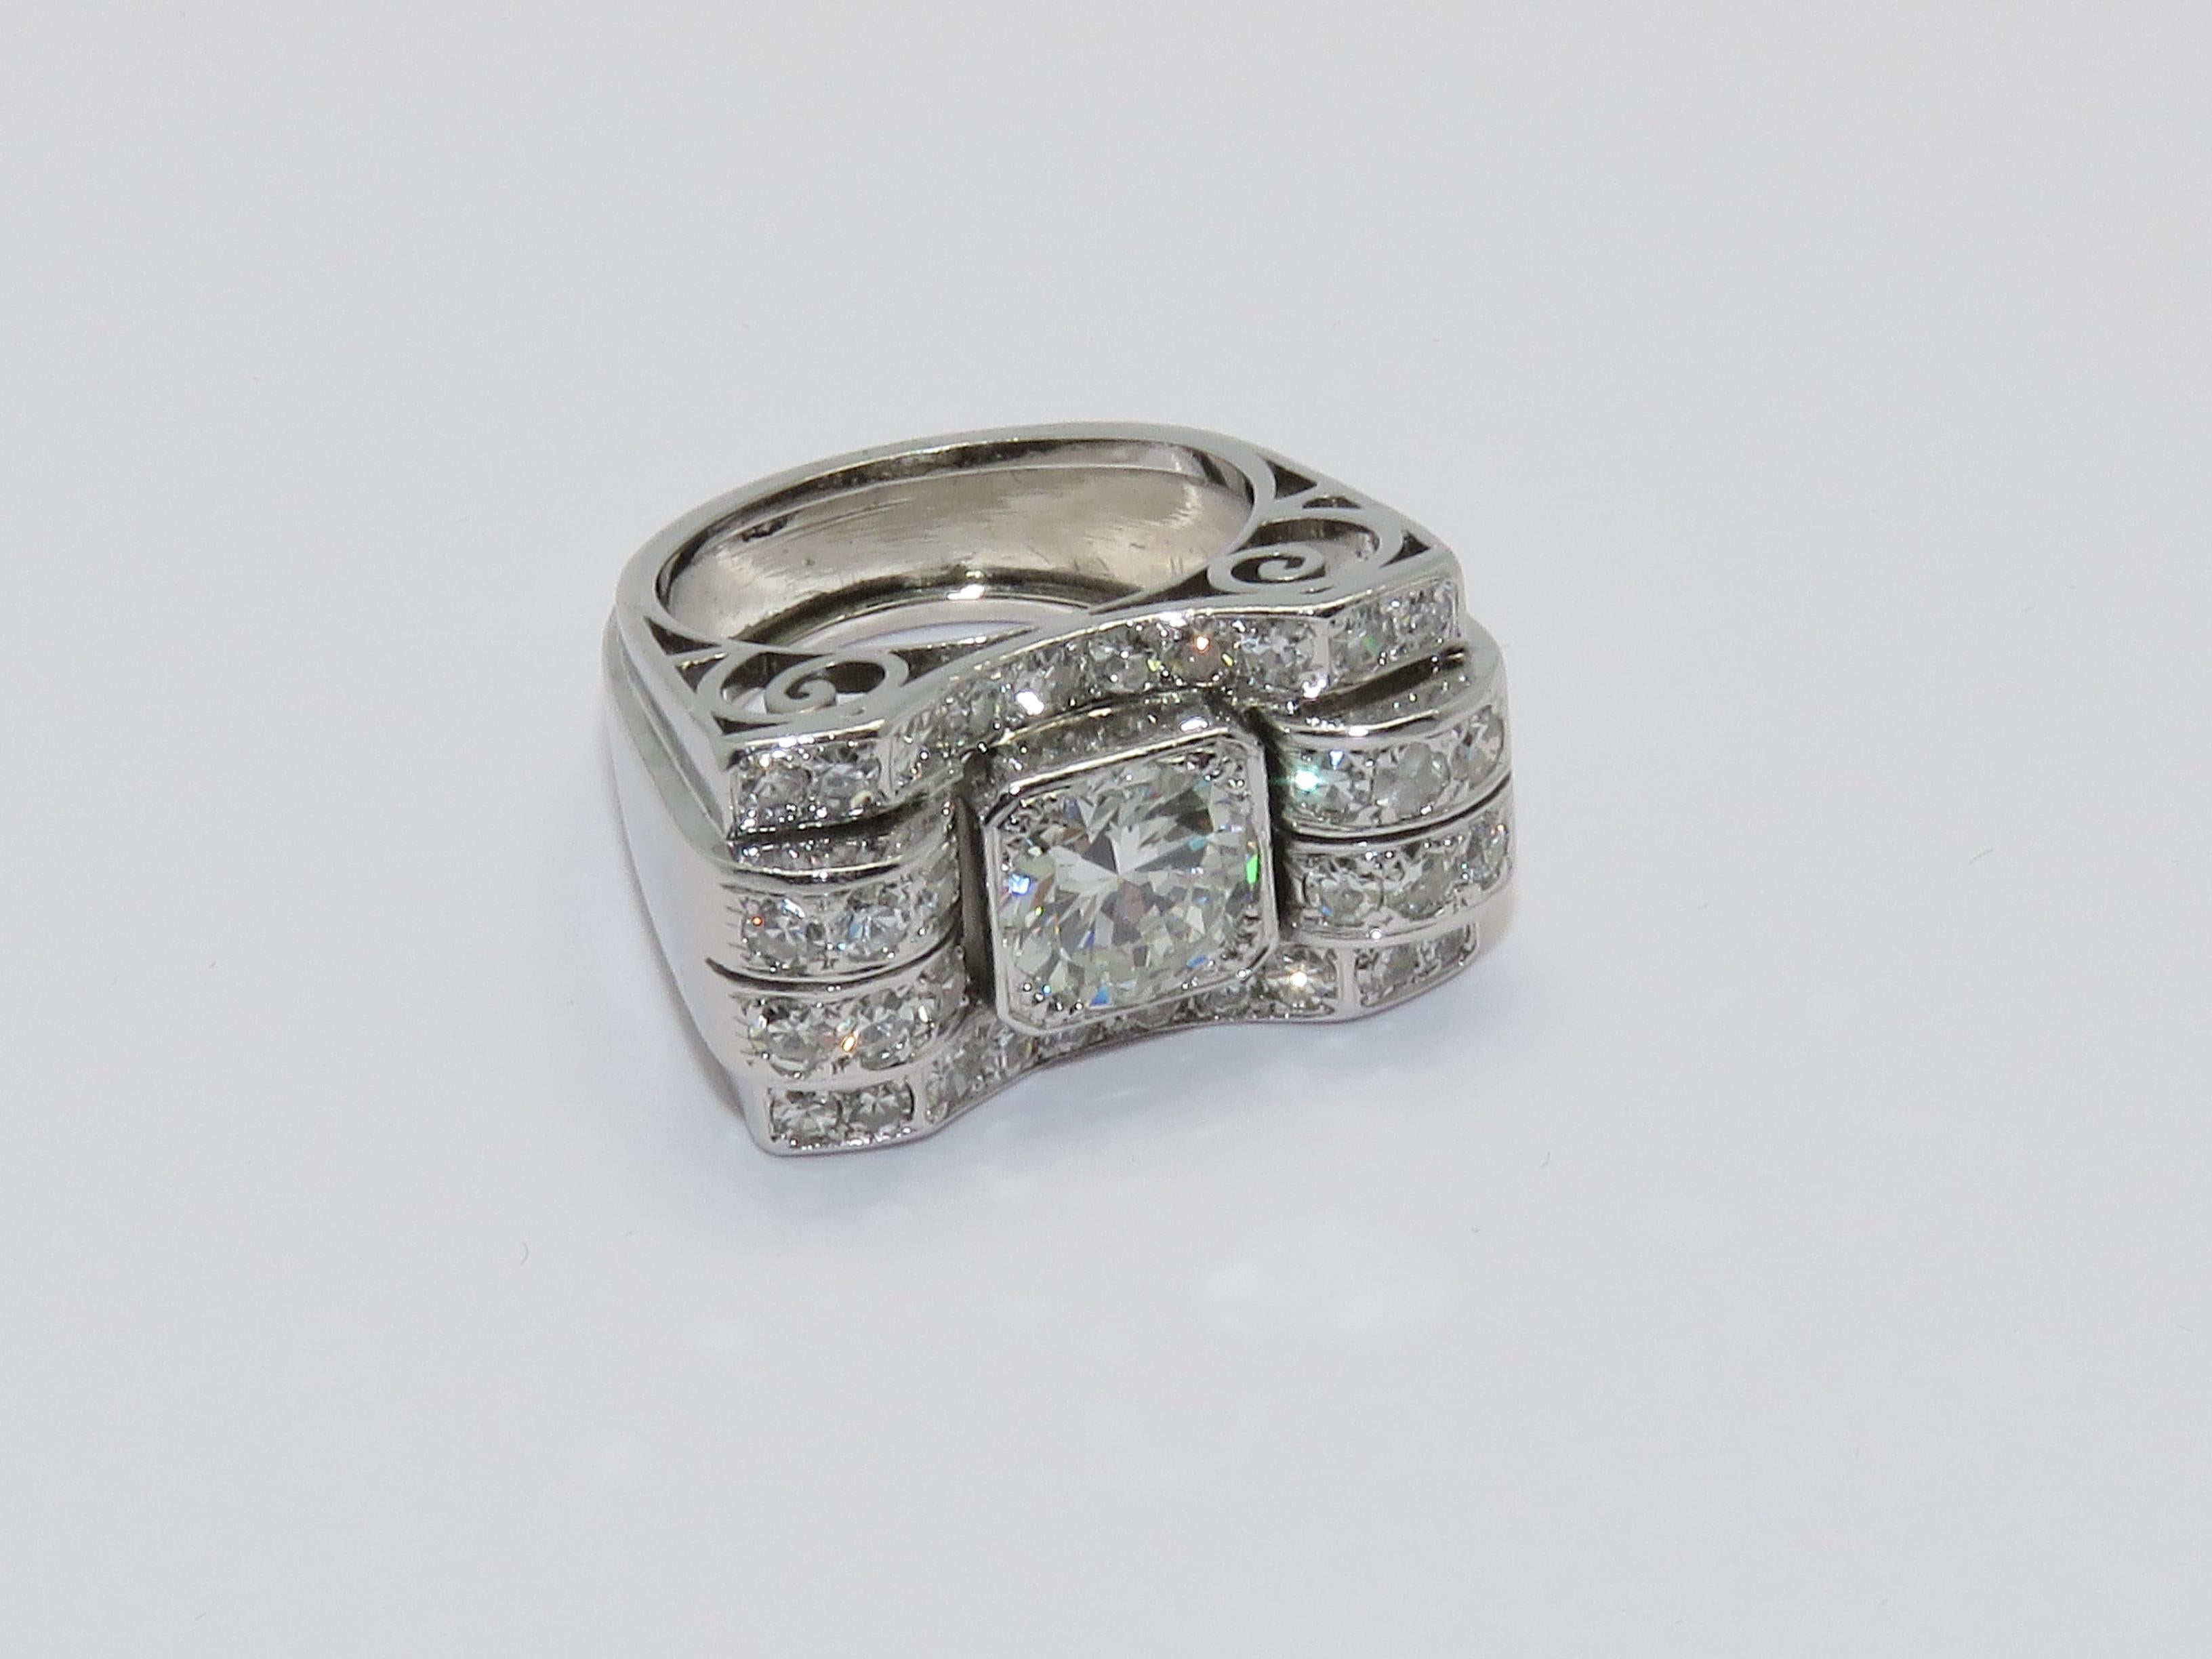 The Central Diamond weights 1.60 carat approximately and the total weight of the diamonds is 2 Ct.

Ring Size: 6
Measurements:
Height: 0.91 in      Width: 0.55 in      Length: 0.91 in      Weight: 17.20 grams